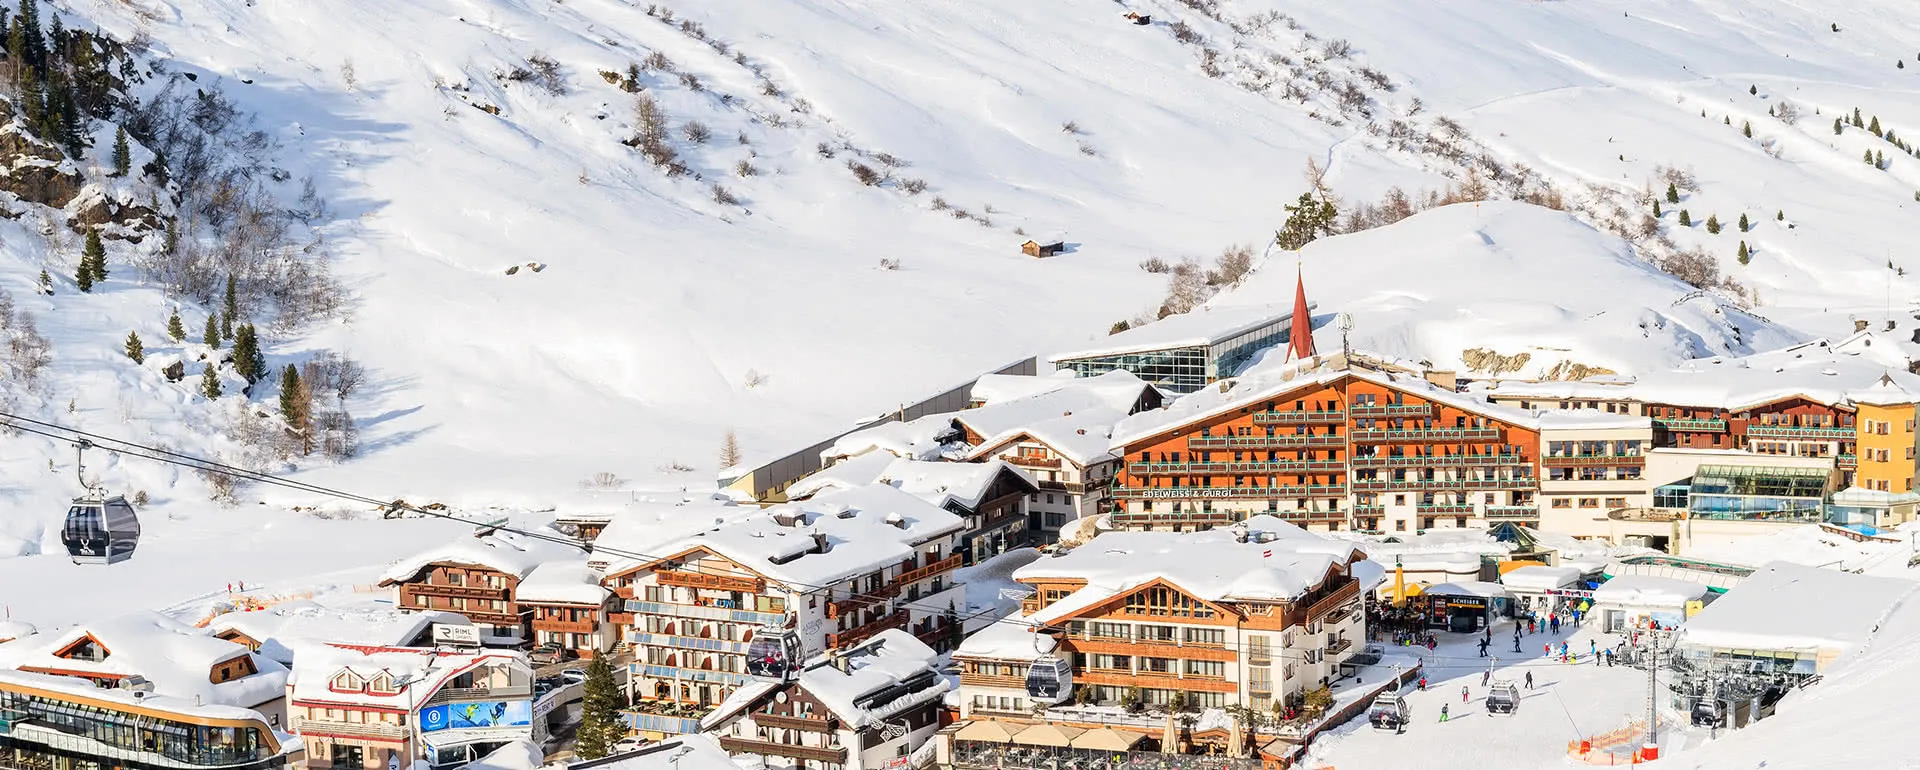 Obergurgl - the destination with youth hostels